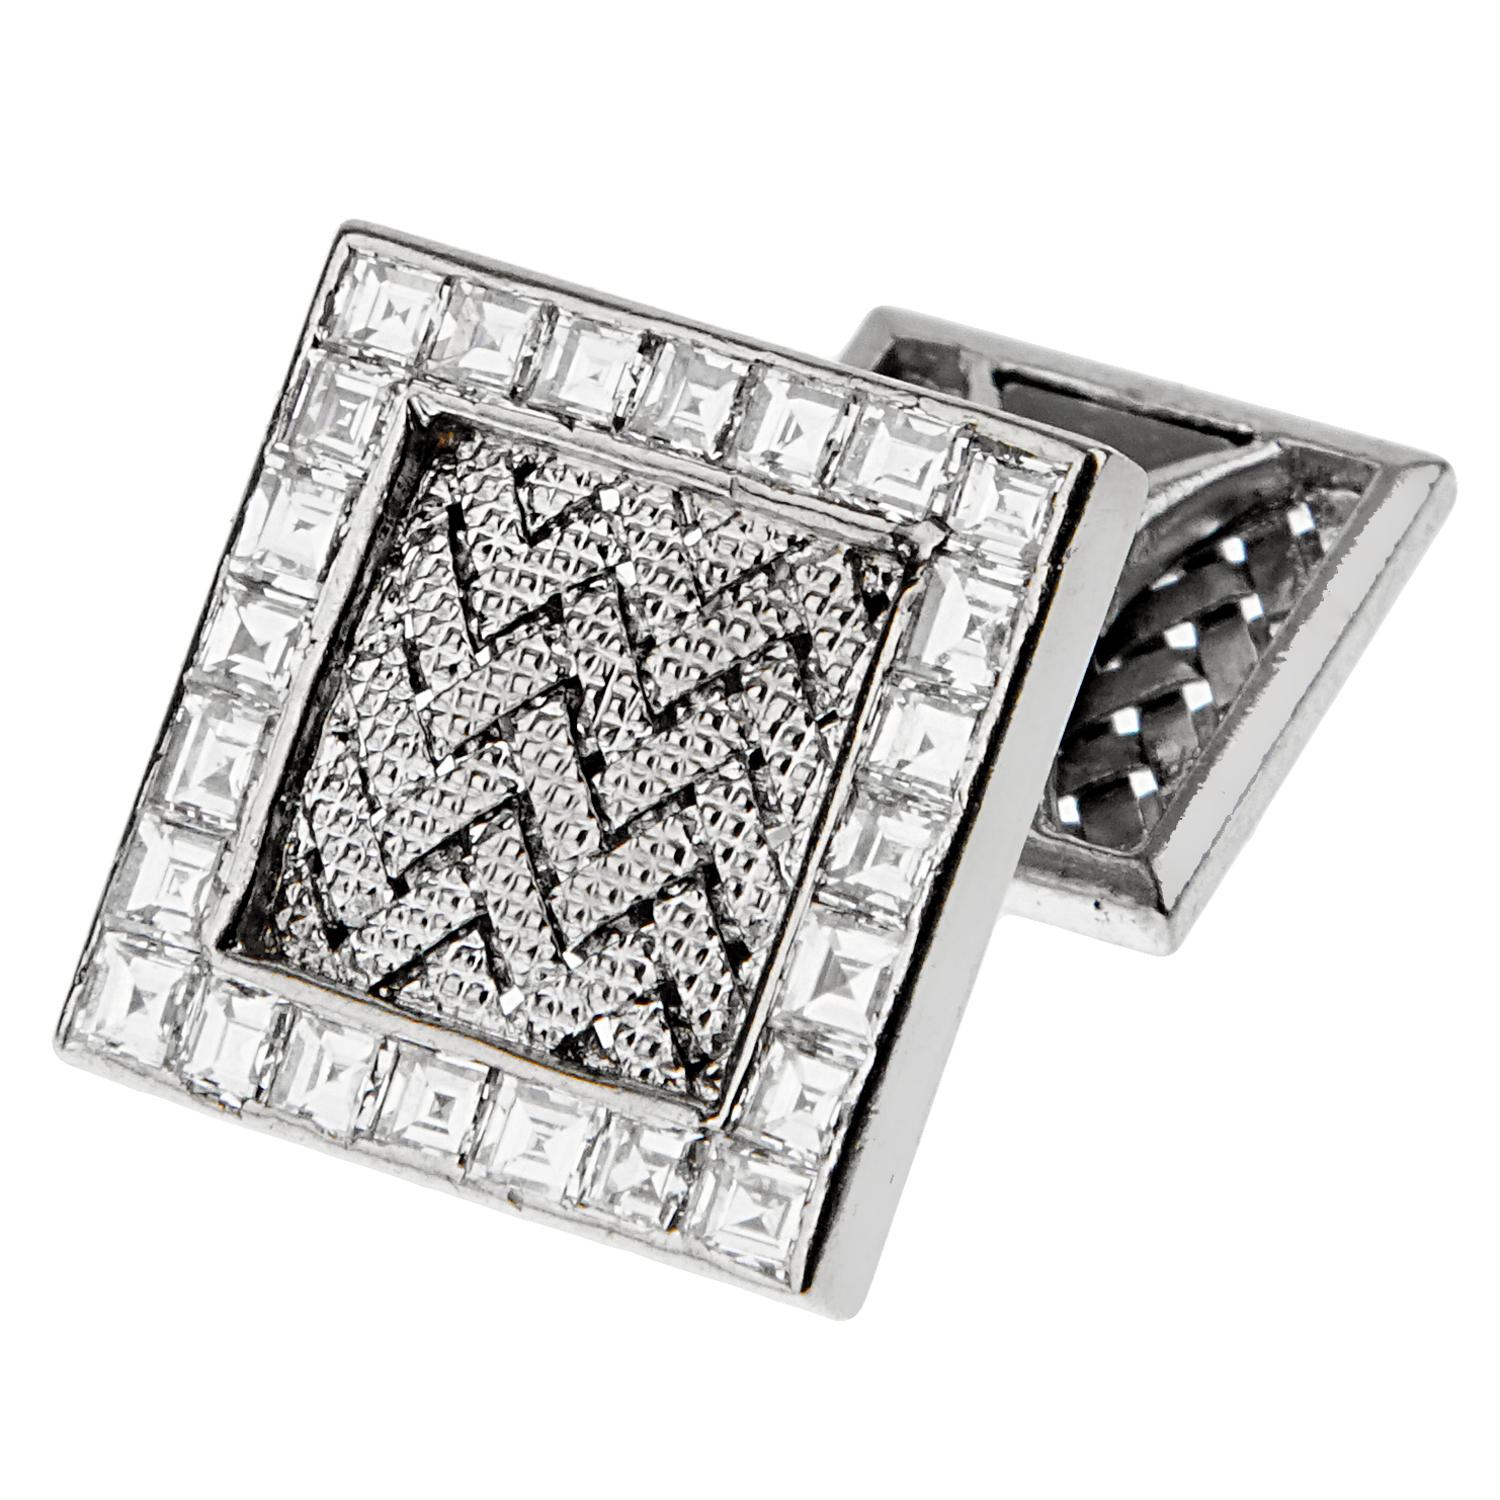 An important pair of vintage Hermes cufflinks showcasing a braided center motif adorned with a row of calibre cut diamonds appx 2ct. The earrings are crafted in 18k white gold, and are fully hallmarked.